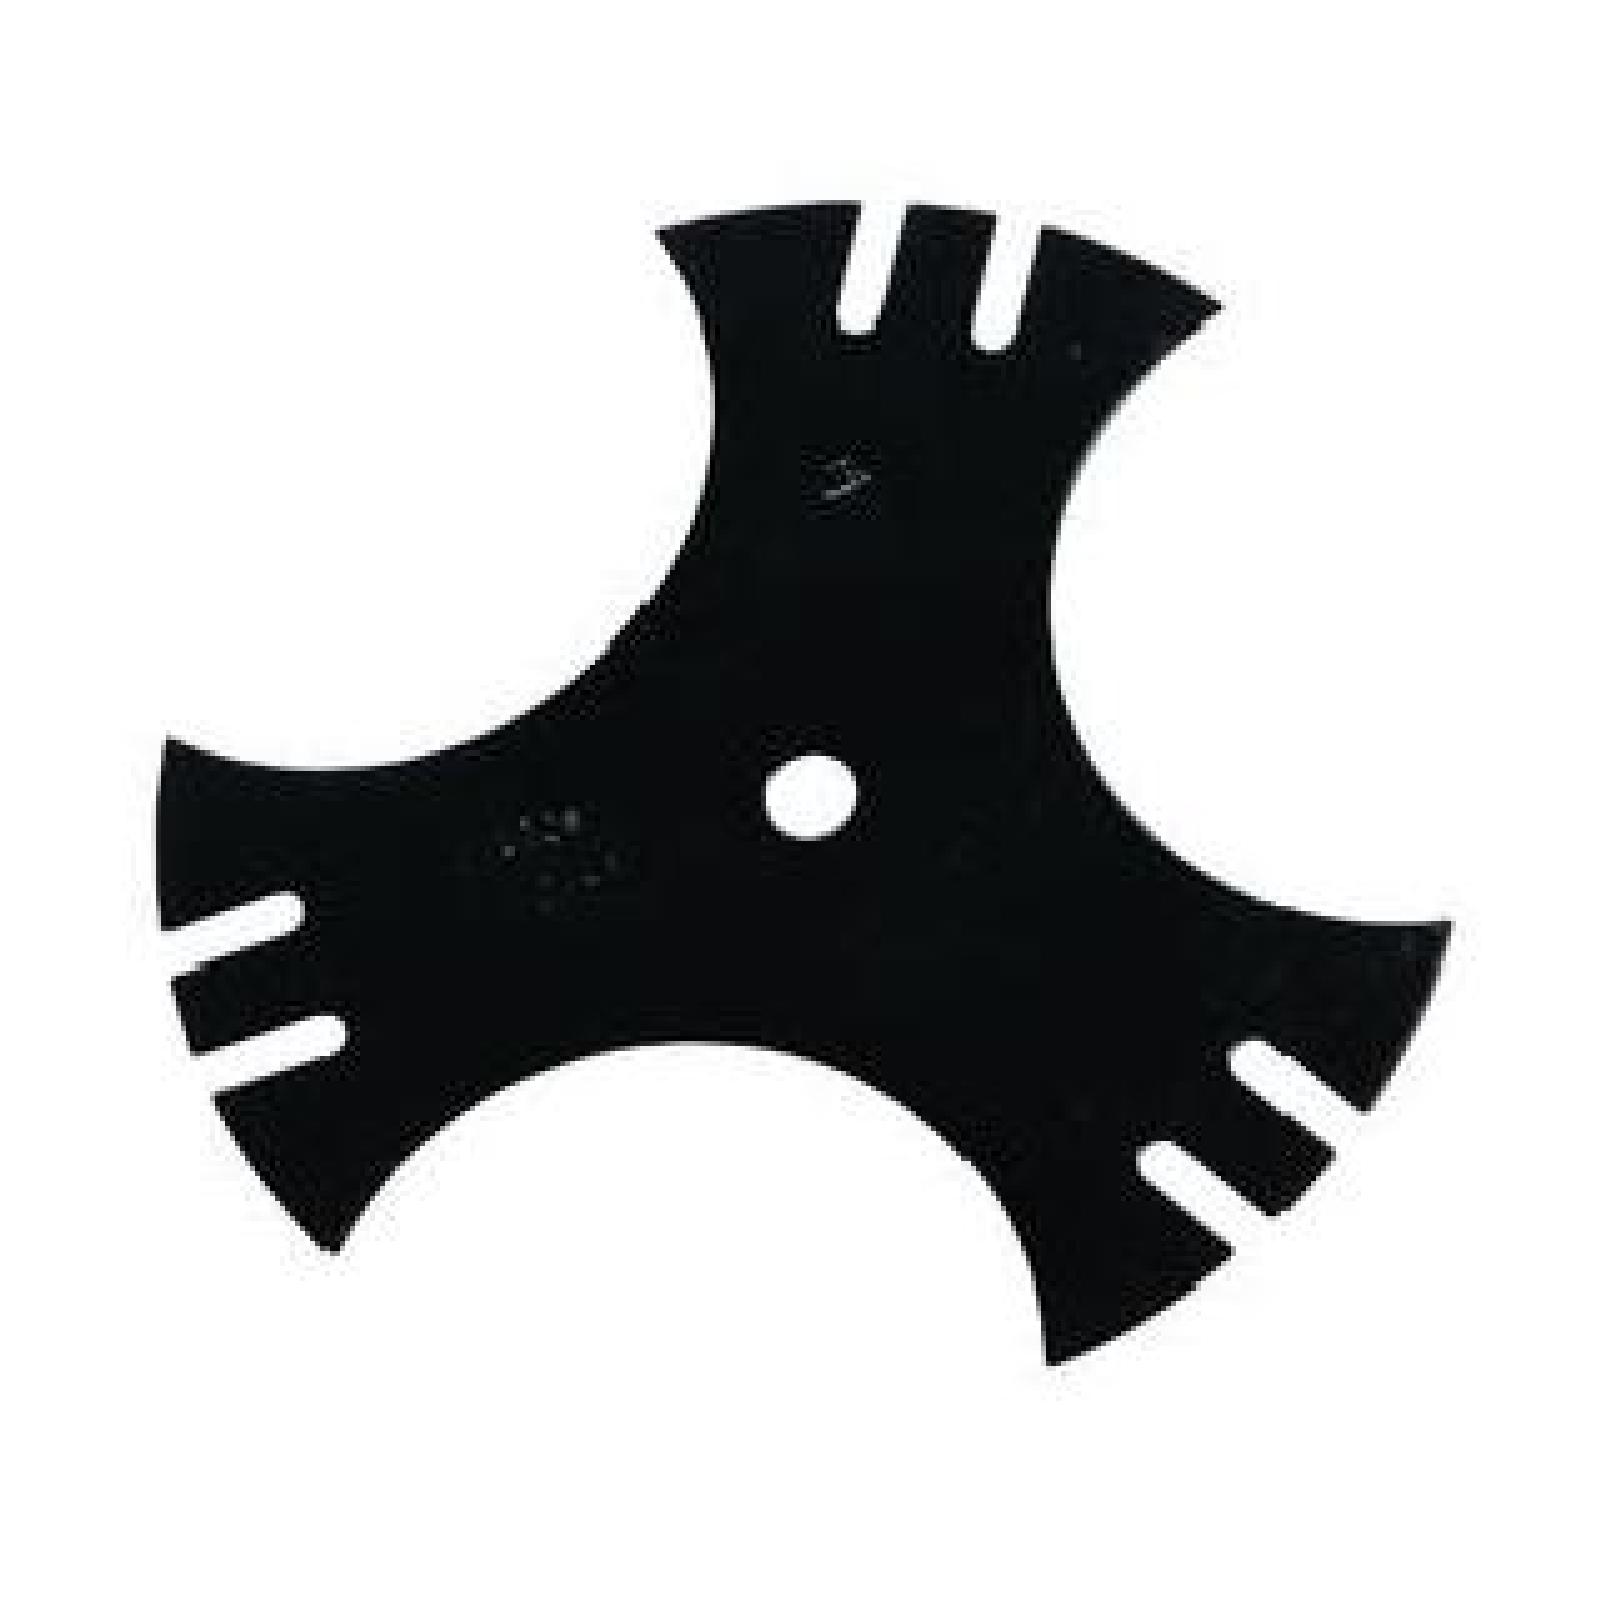 EDGER BLADE9IN X 5/8 3-TOOTH part# 40-009 by Oregon